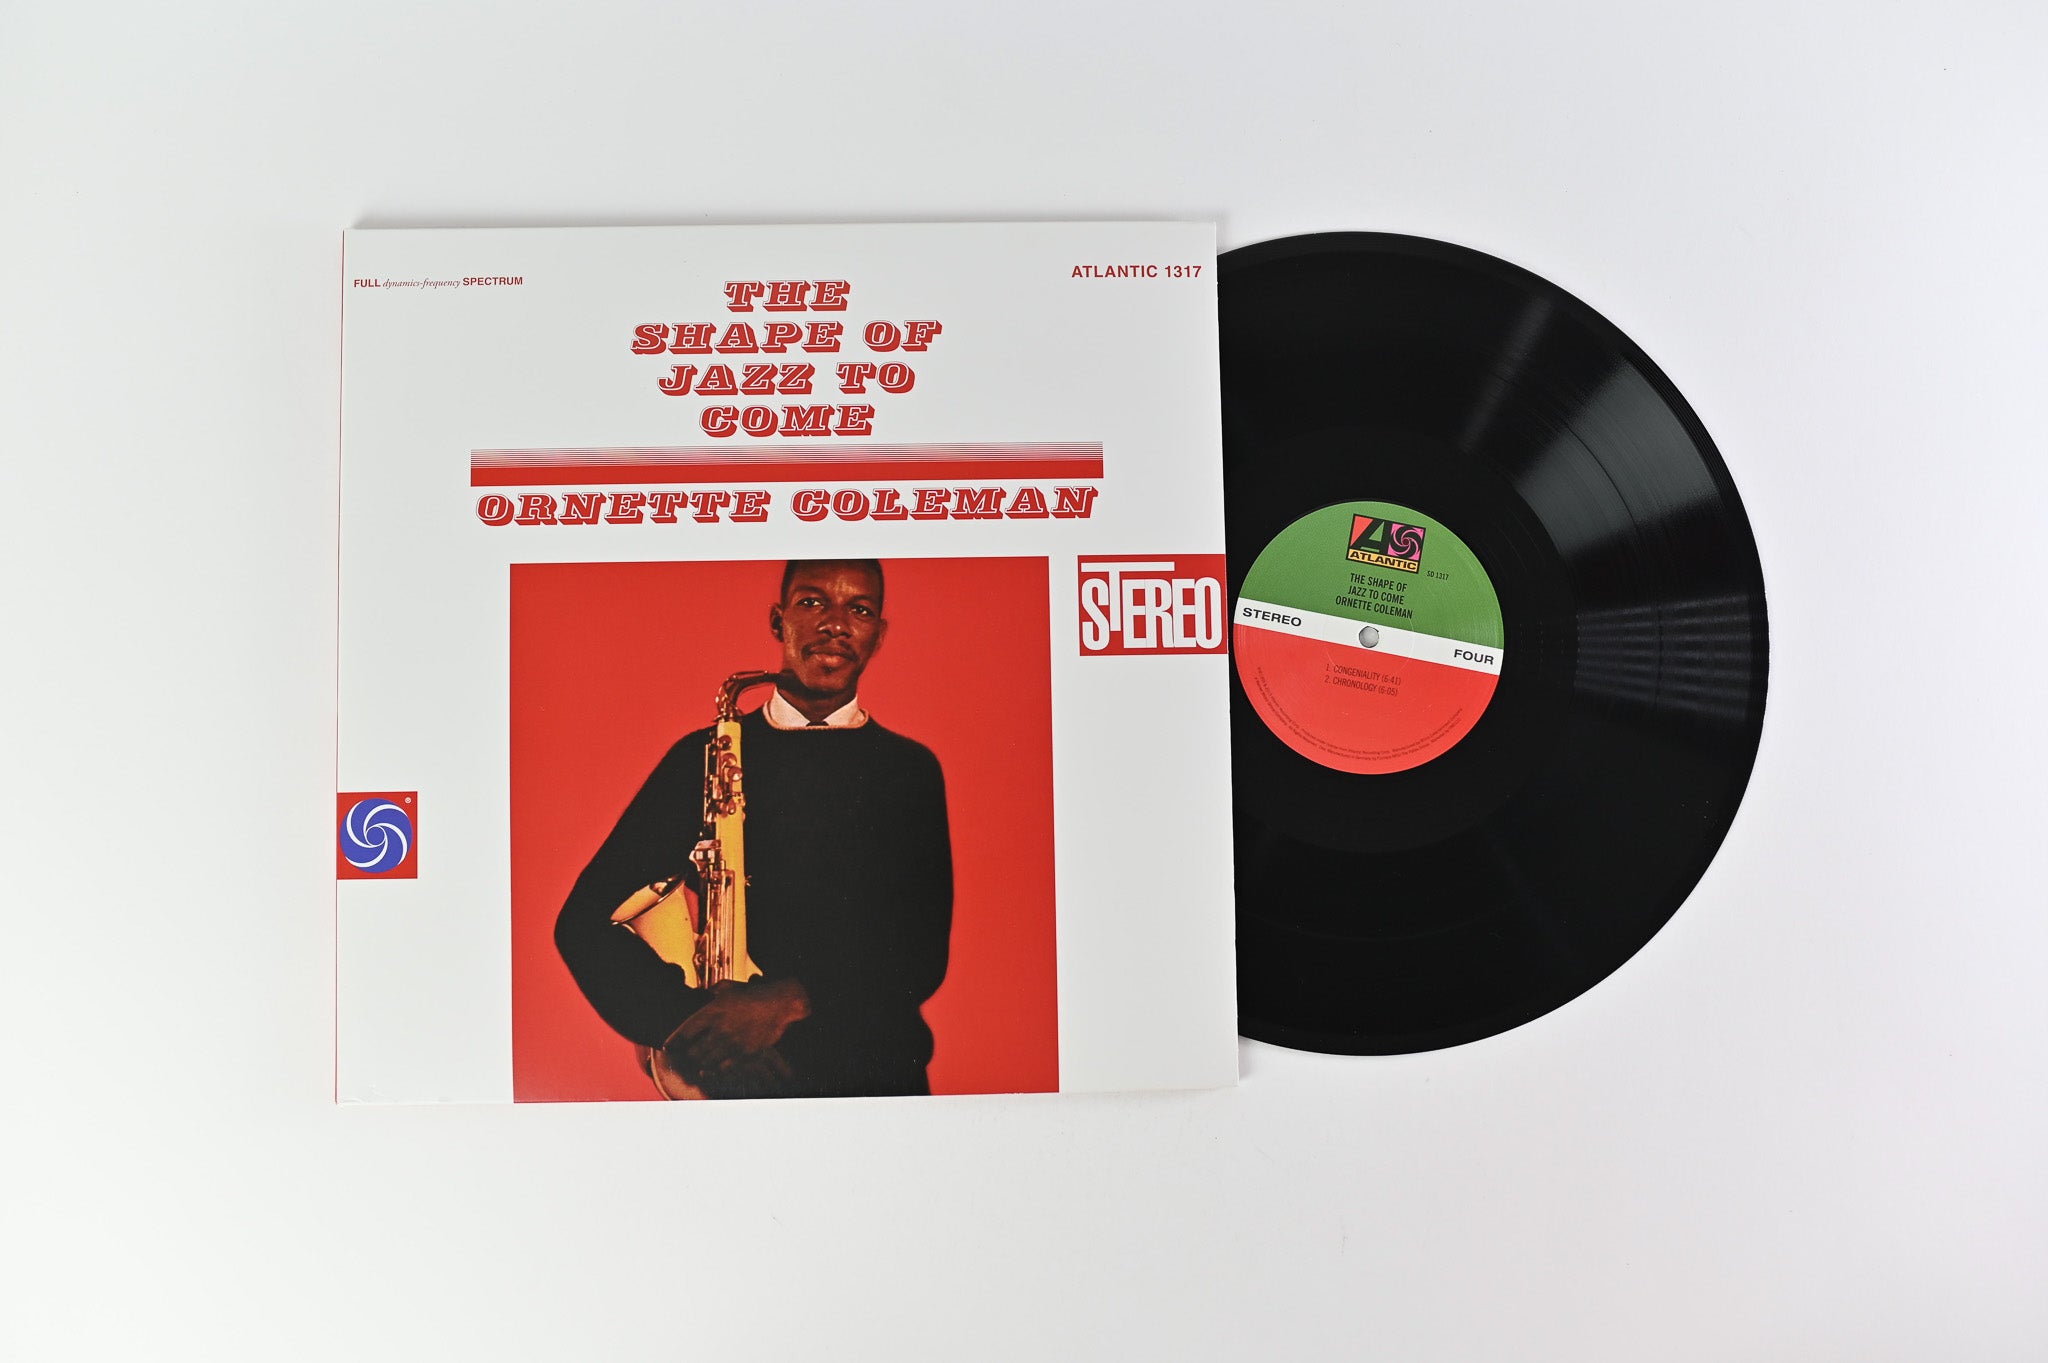 Ornette Coleman - The Shape Of Jazz To Come on ORG Music - 45 RPM